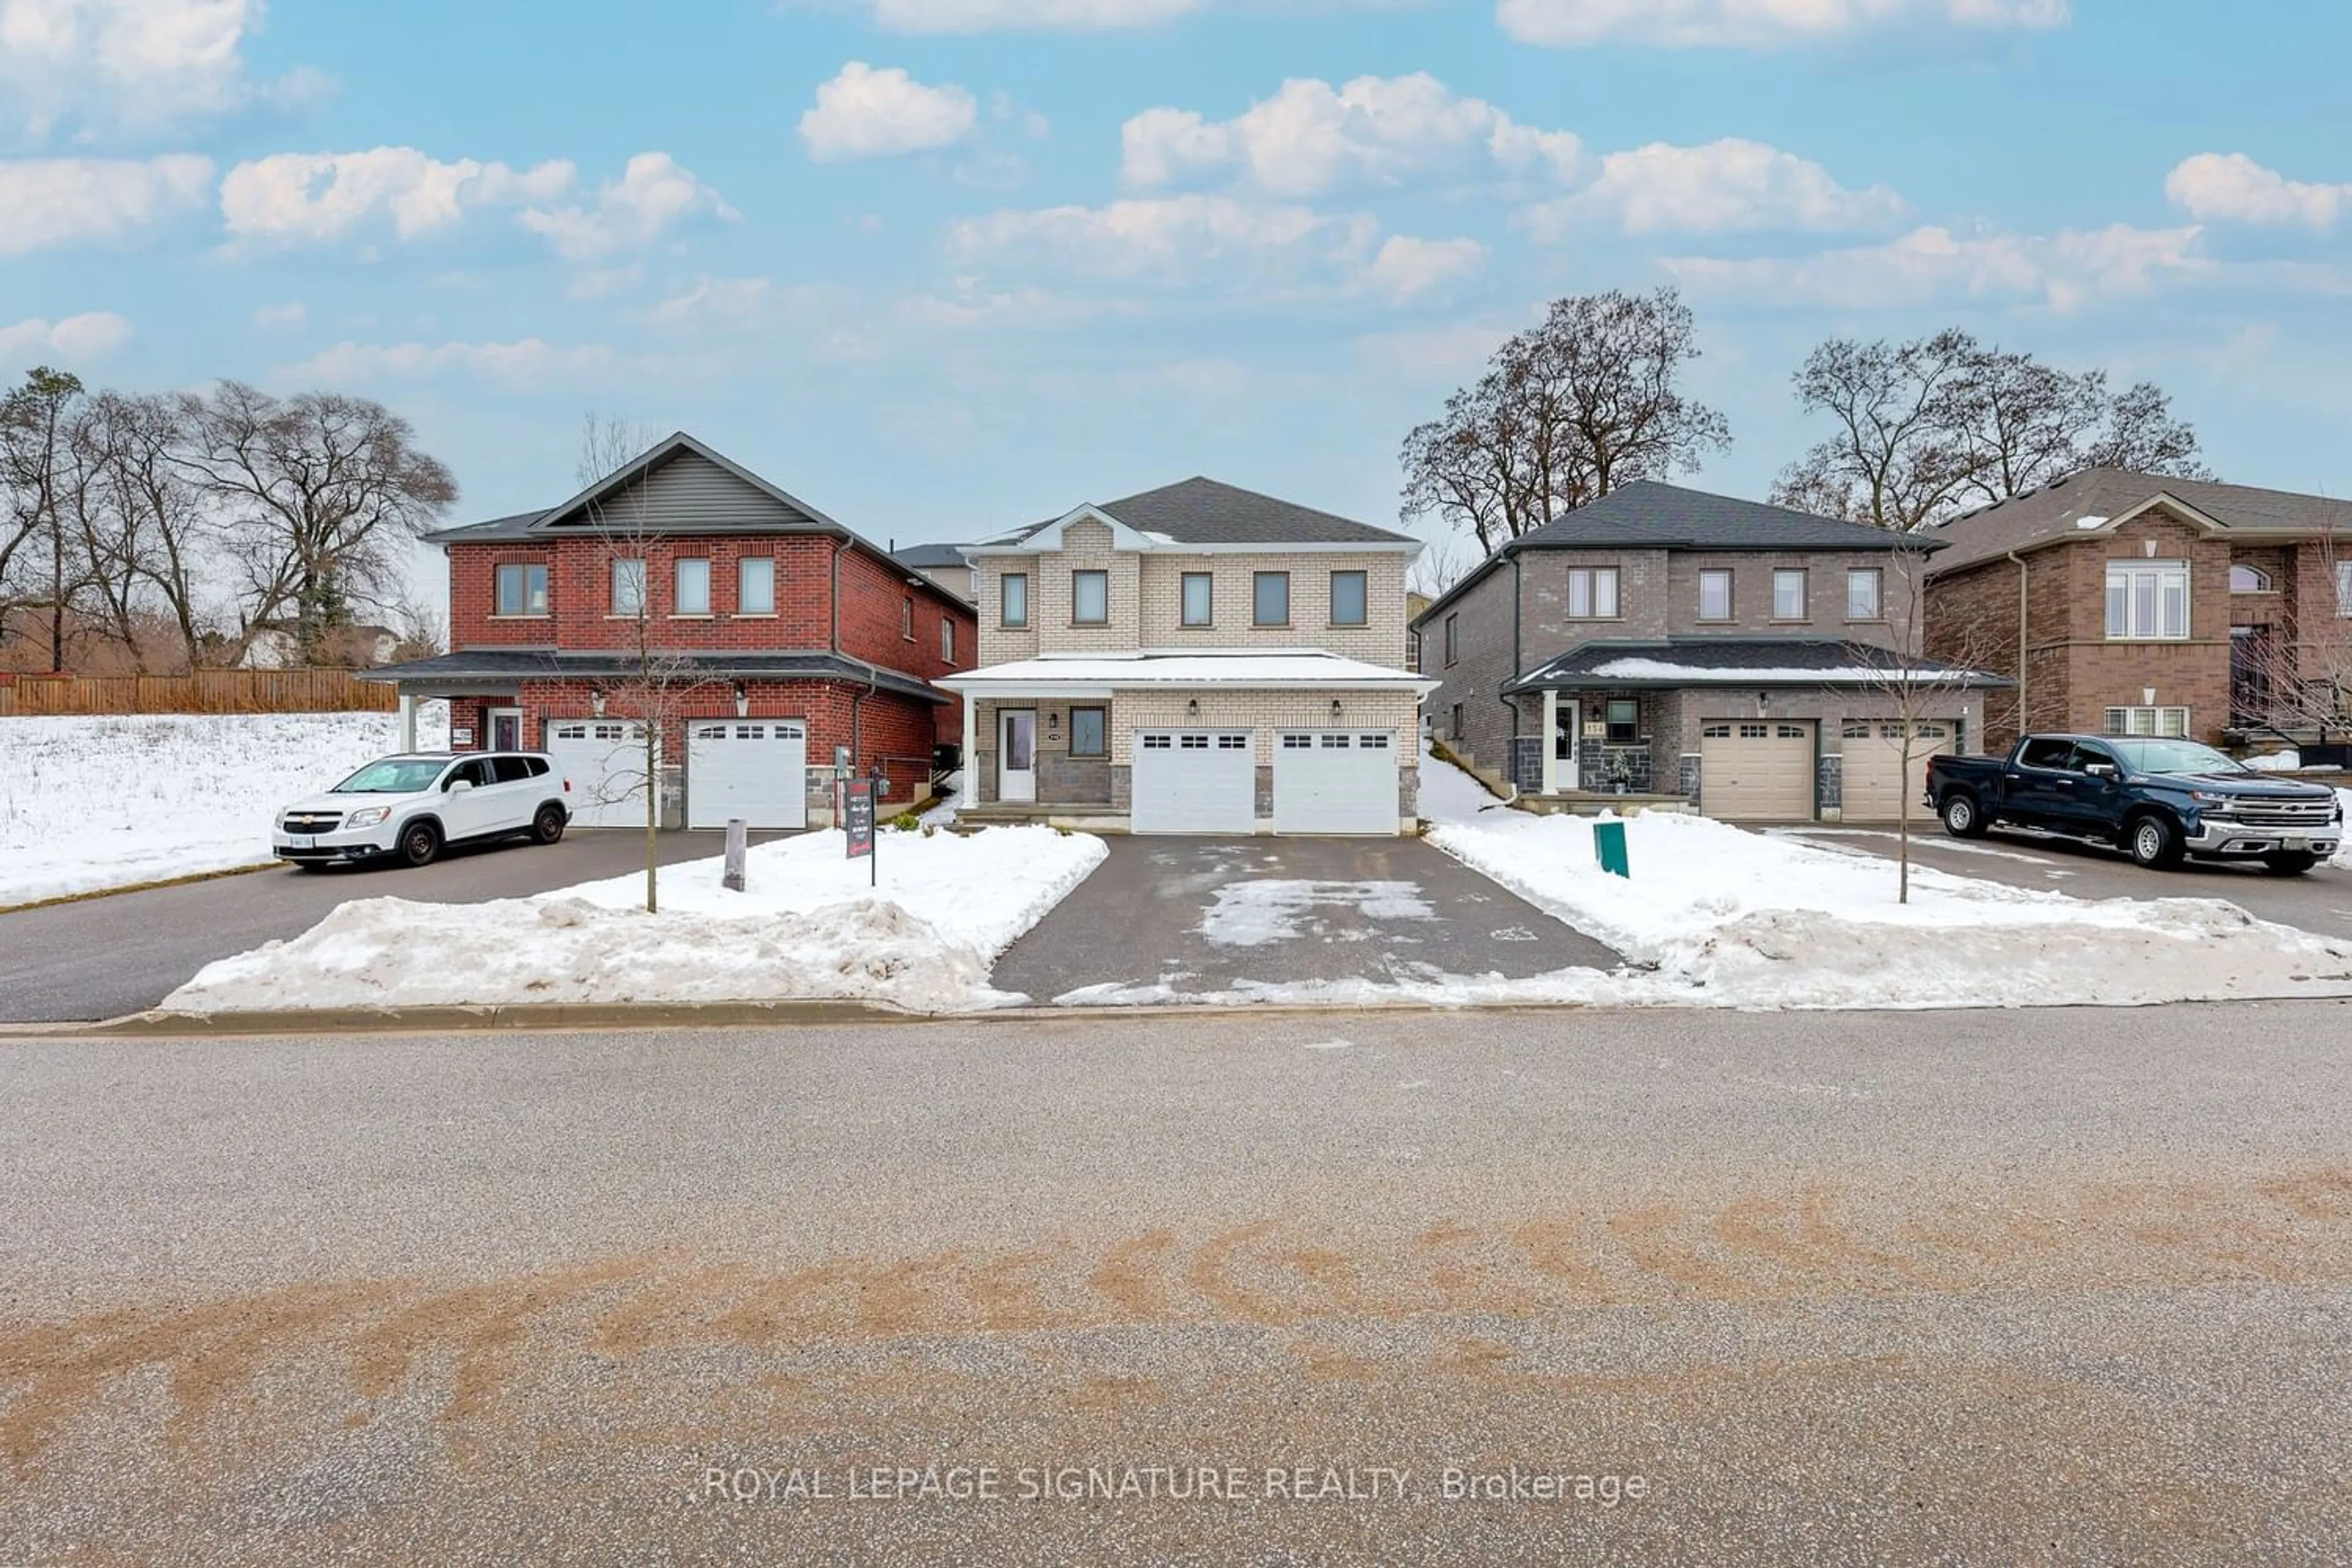 Street view for 152 Bishop Dr, Barrie Ontario L4N 6X8